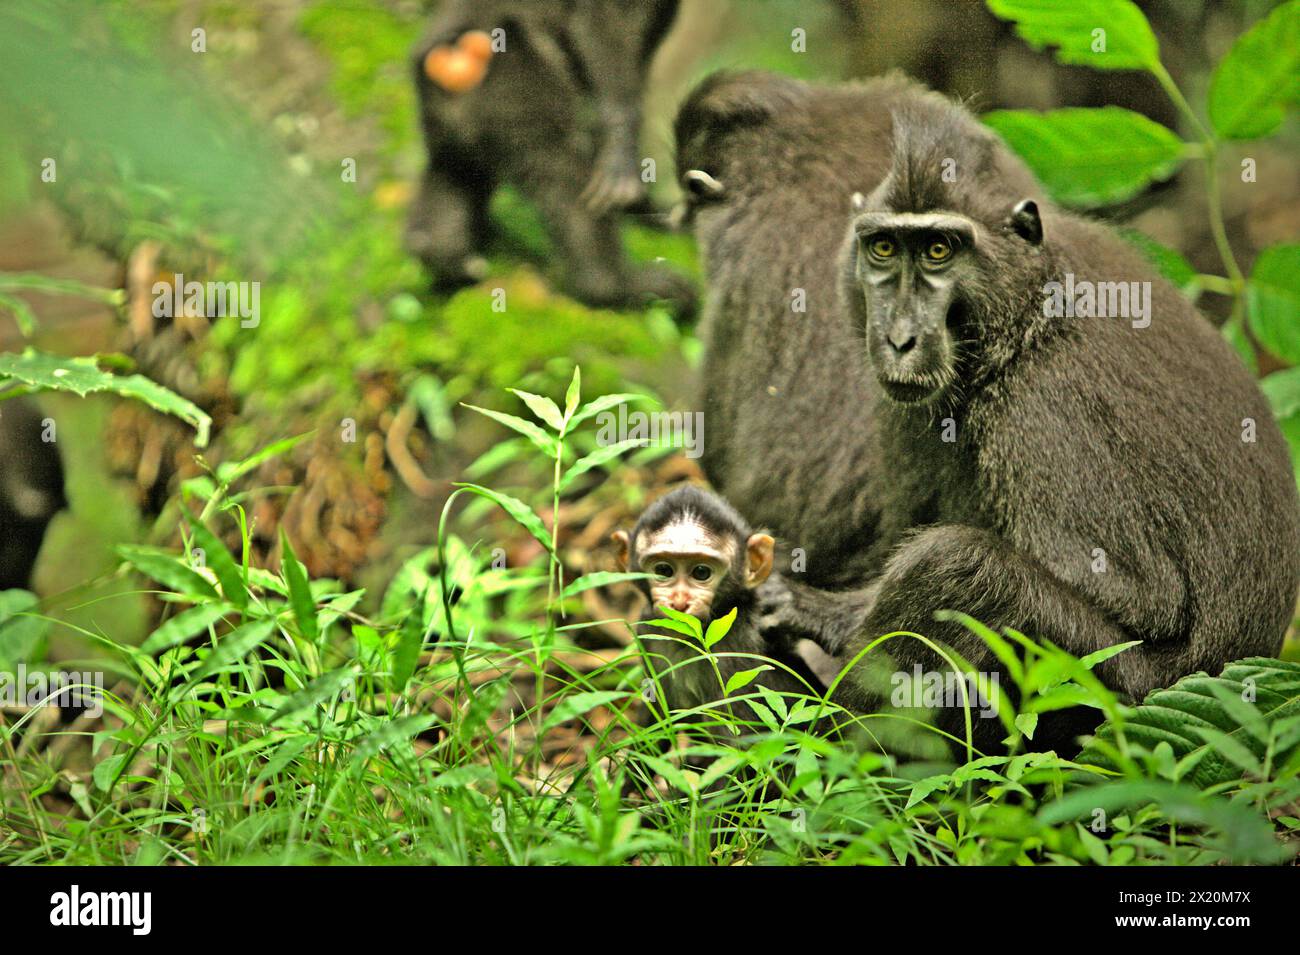 A crested macaque (Macaca nigra) offspring is being in the care of an adult female individual in Tangkoko forest, North Sulawesi, Indonesia. Climate change is one of the main factors affecting biodiversity worldwide at an alarming rate according to a team of scientists led by Antonio Acini Vasquez-Aguilar in their March 2024 research paper published on Environ Monit Assess. It might shift the geographic distribution of species, including species which depend greatly on forest cover such as primates, they say. Stock Photo